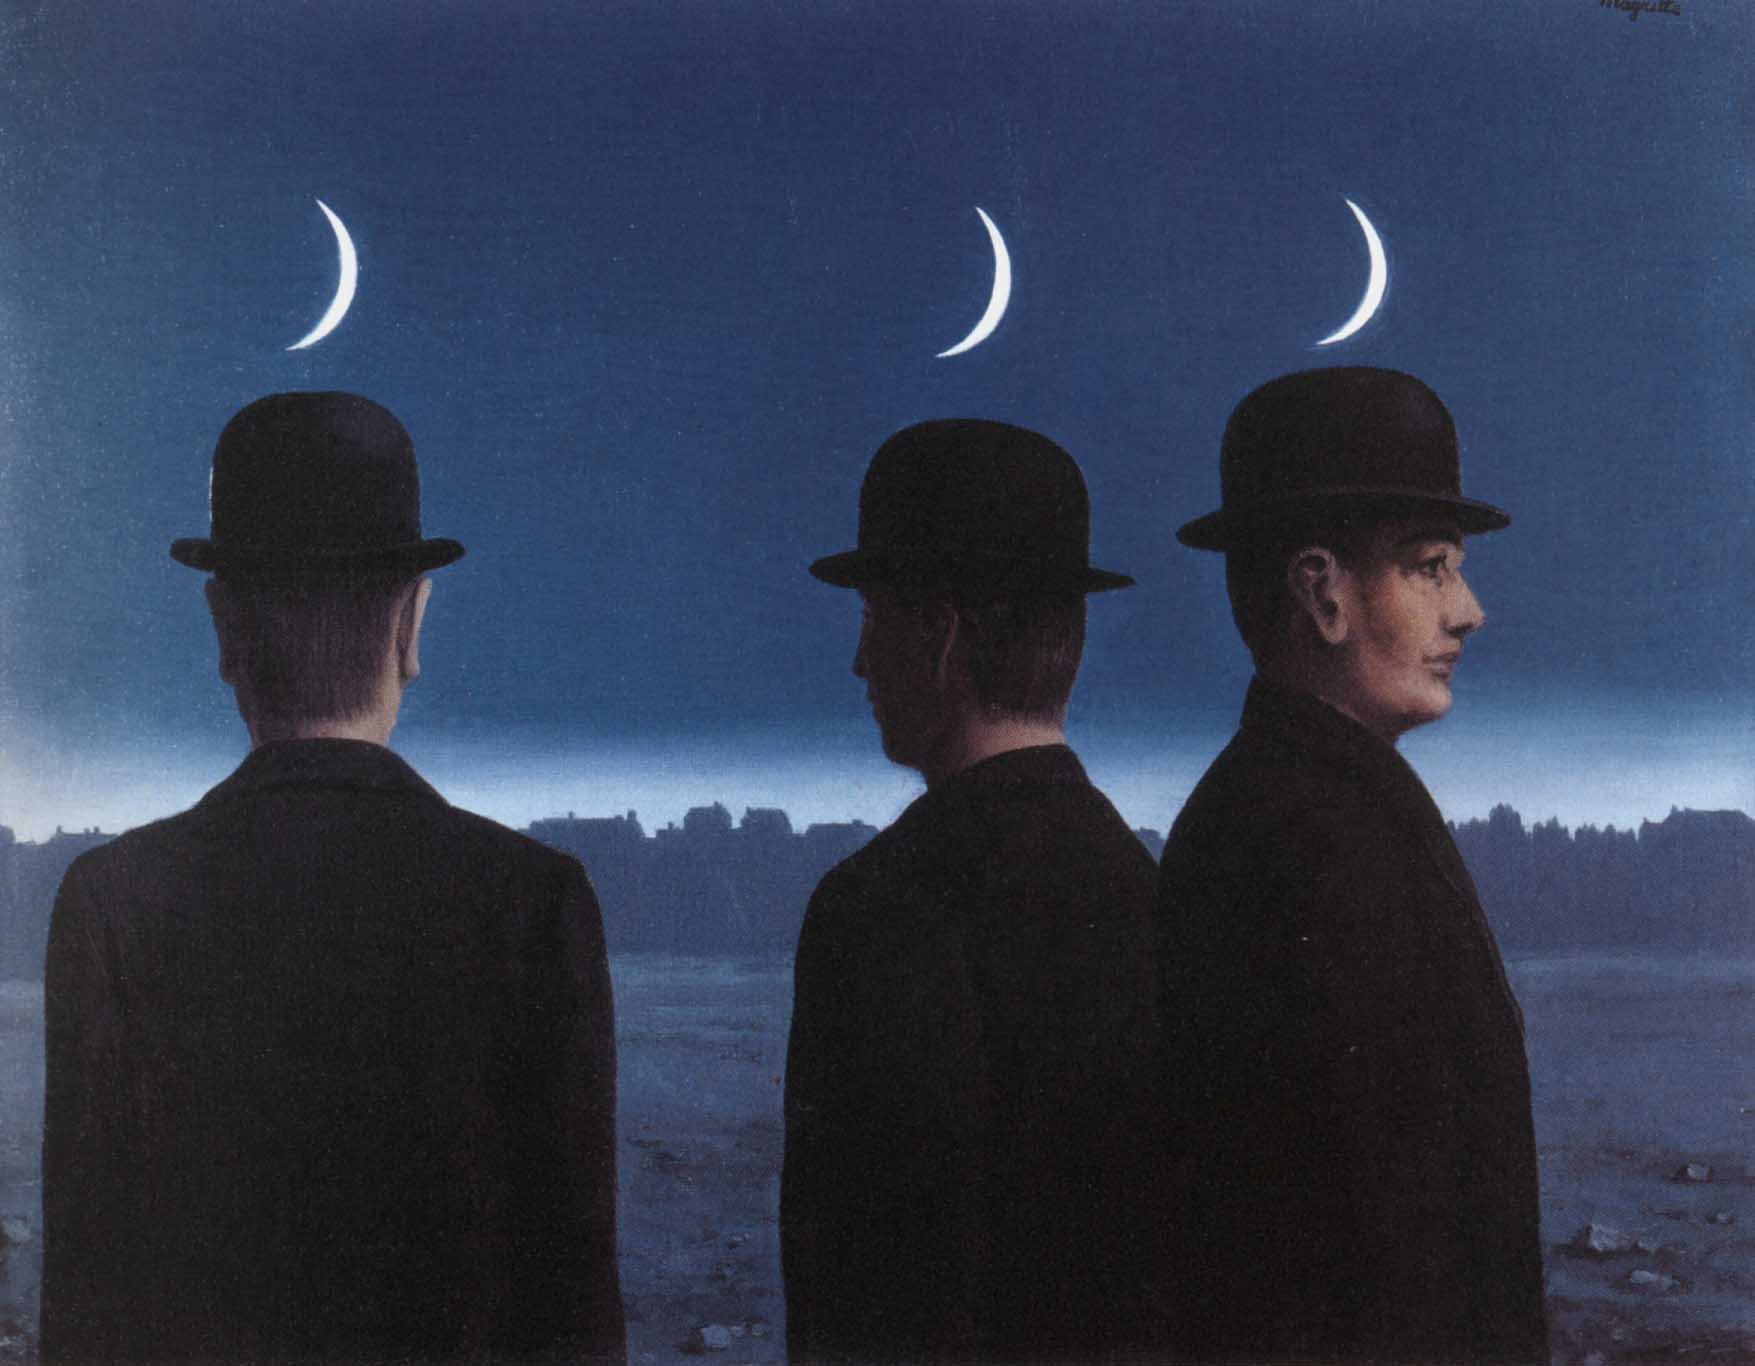 The Mysteries of the Horizon by René Magritte - 1955 - 50 cm × 65 cm private collection